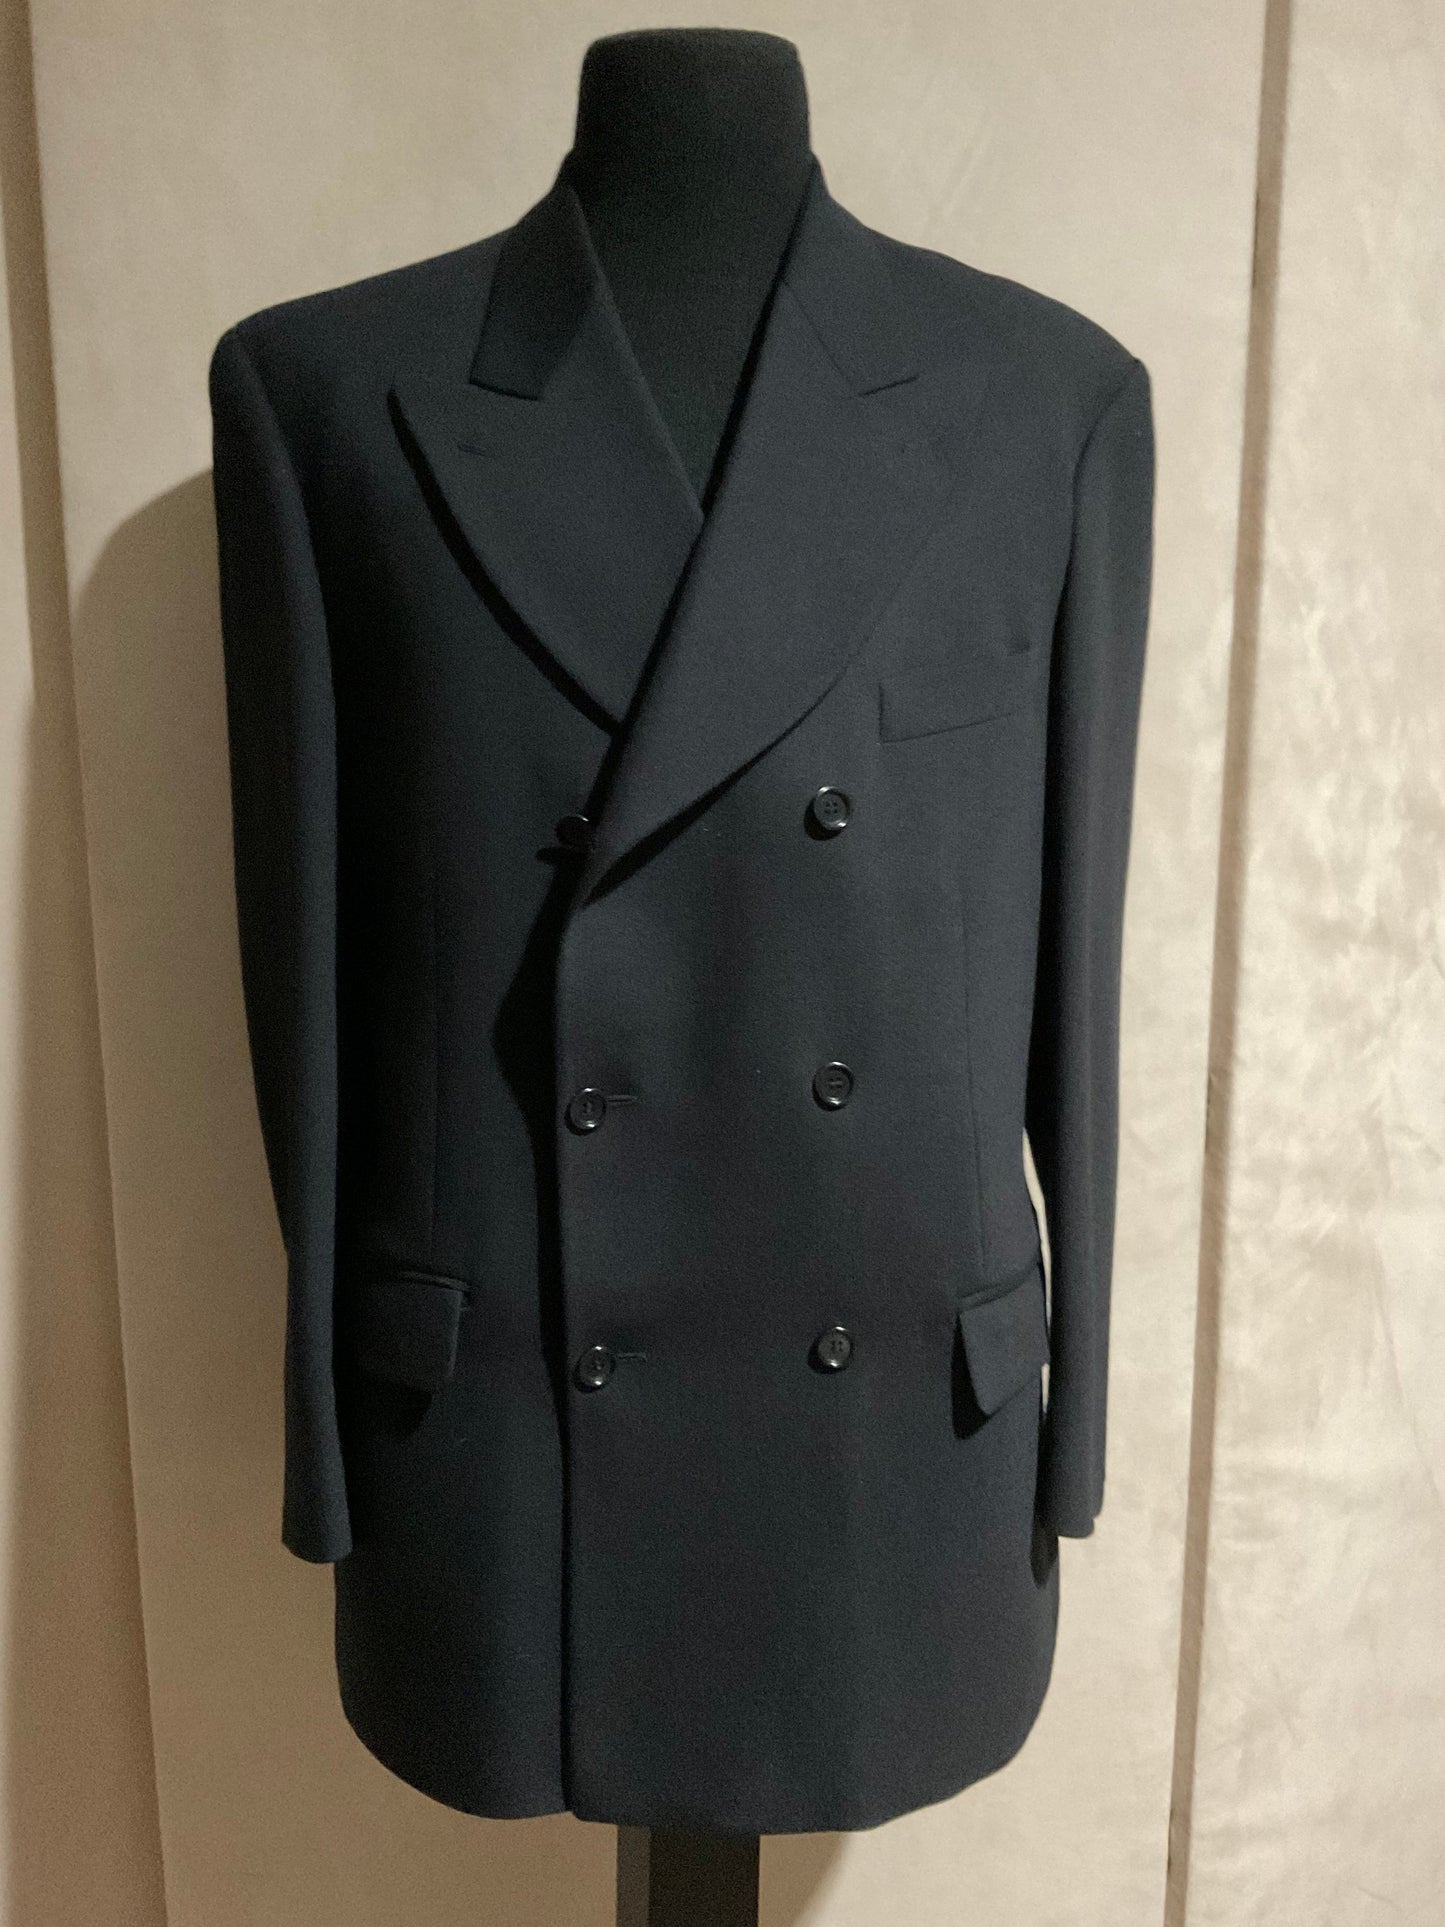 R P SUIT / 6 BUTTON DOUBLE BREASTED / BLACK / 40 REG OR LONG / MADE IN ITALY